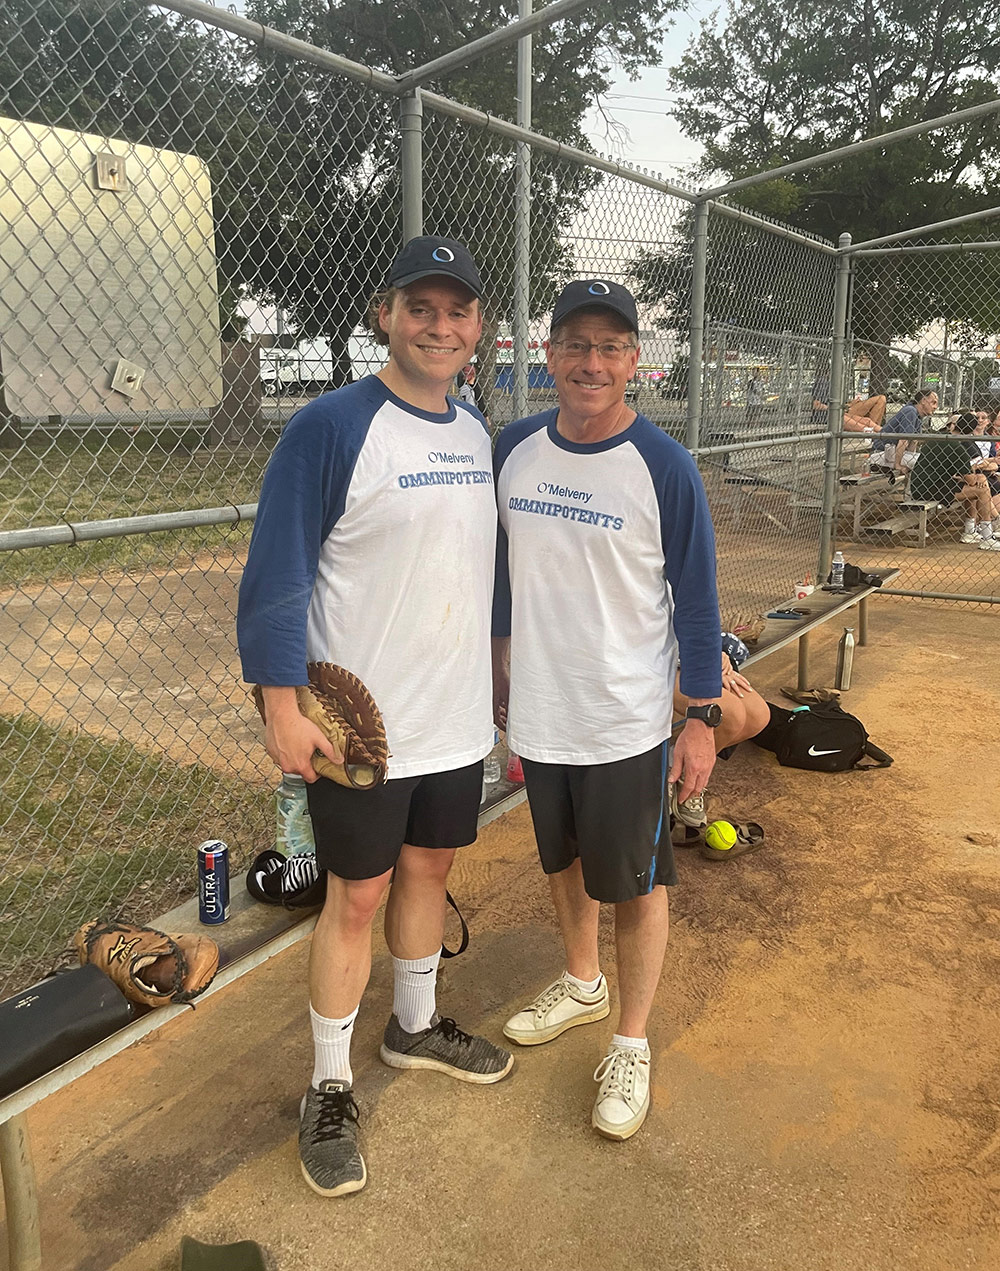 Two colleagues in blue and white O'Melveny t-shirts and hats at a firm baseball game. One colleague is holding a catcher's mitt.